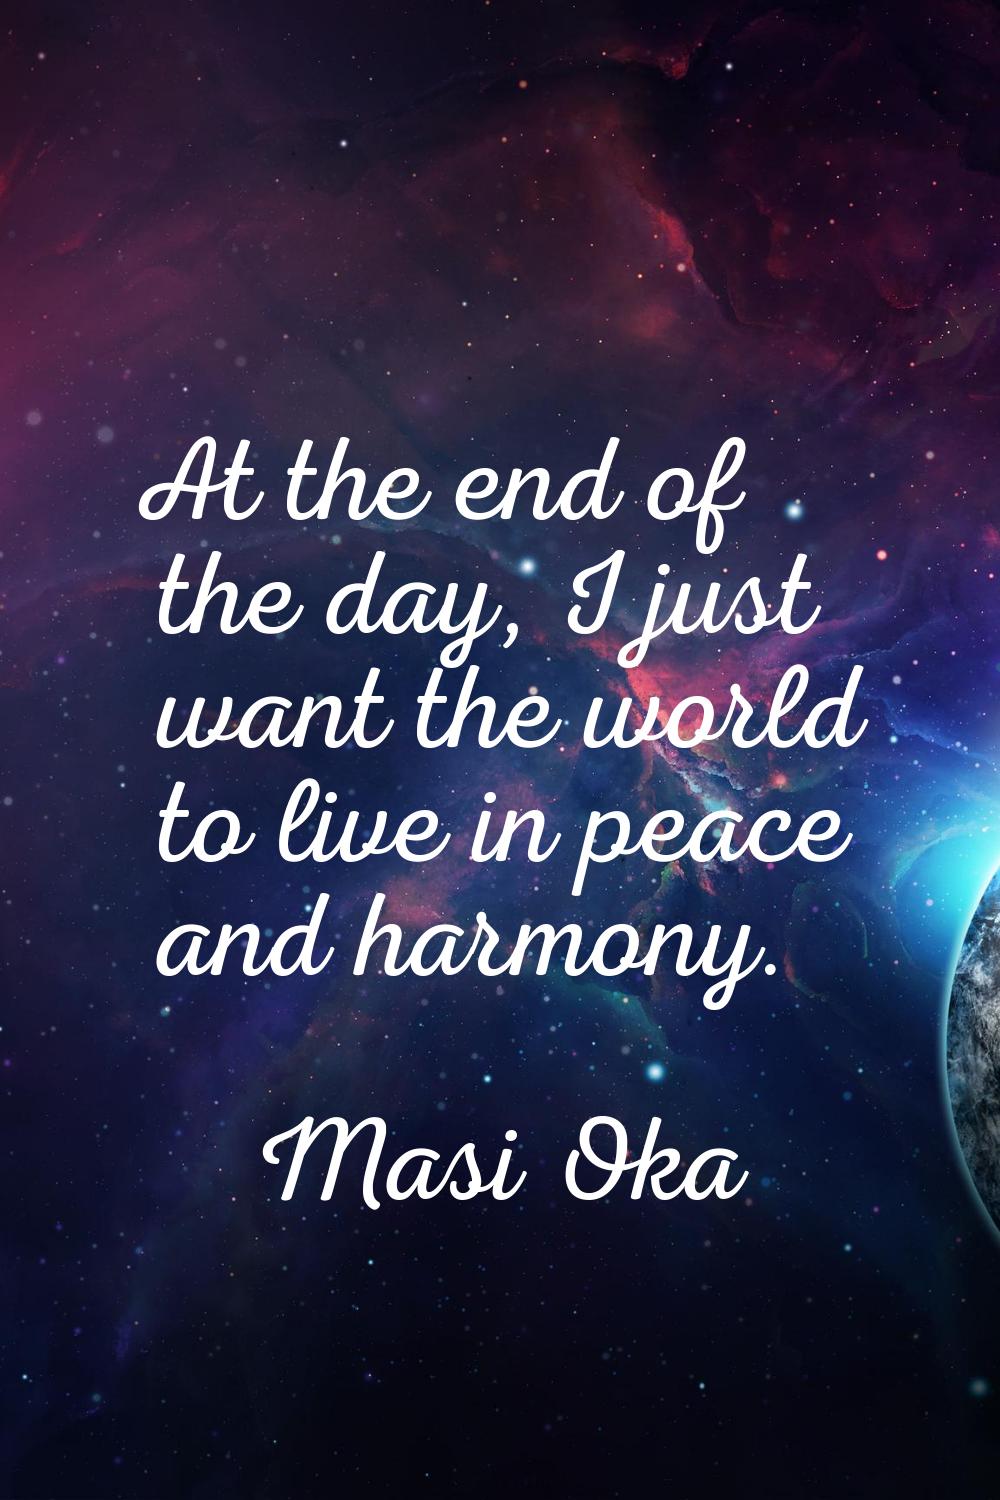 At the end of the day, I just want the world to live in peace and harmony.